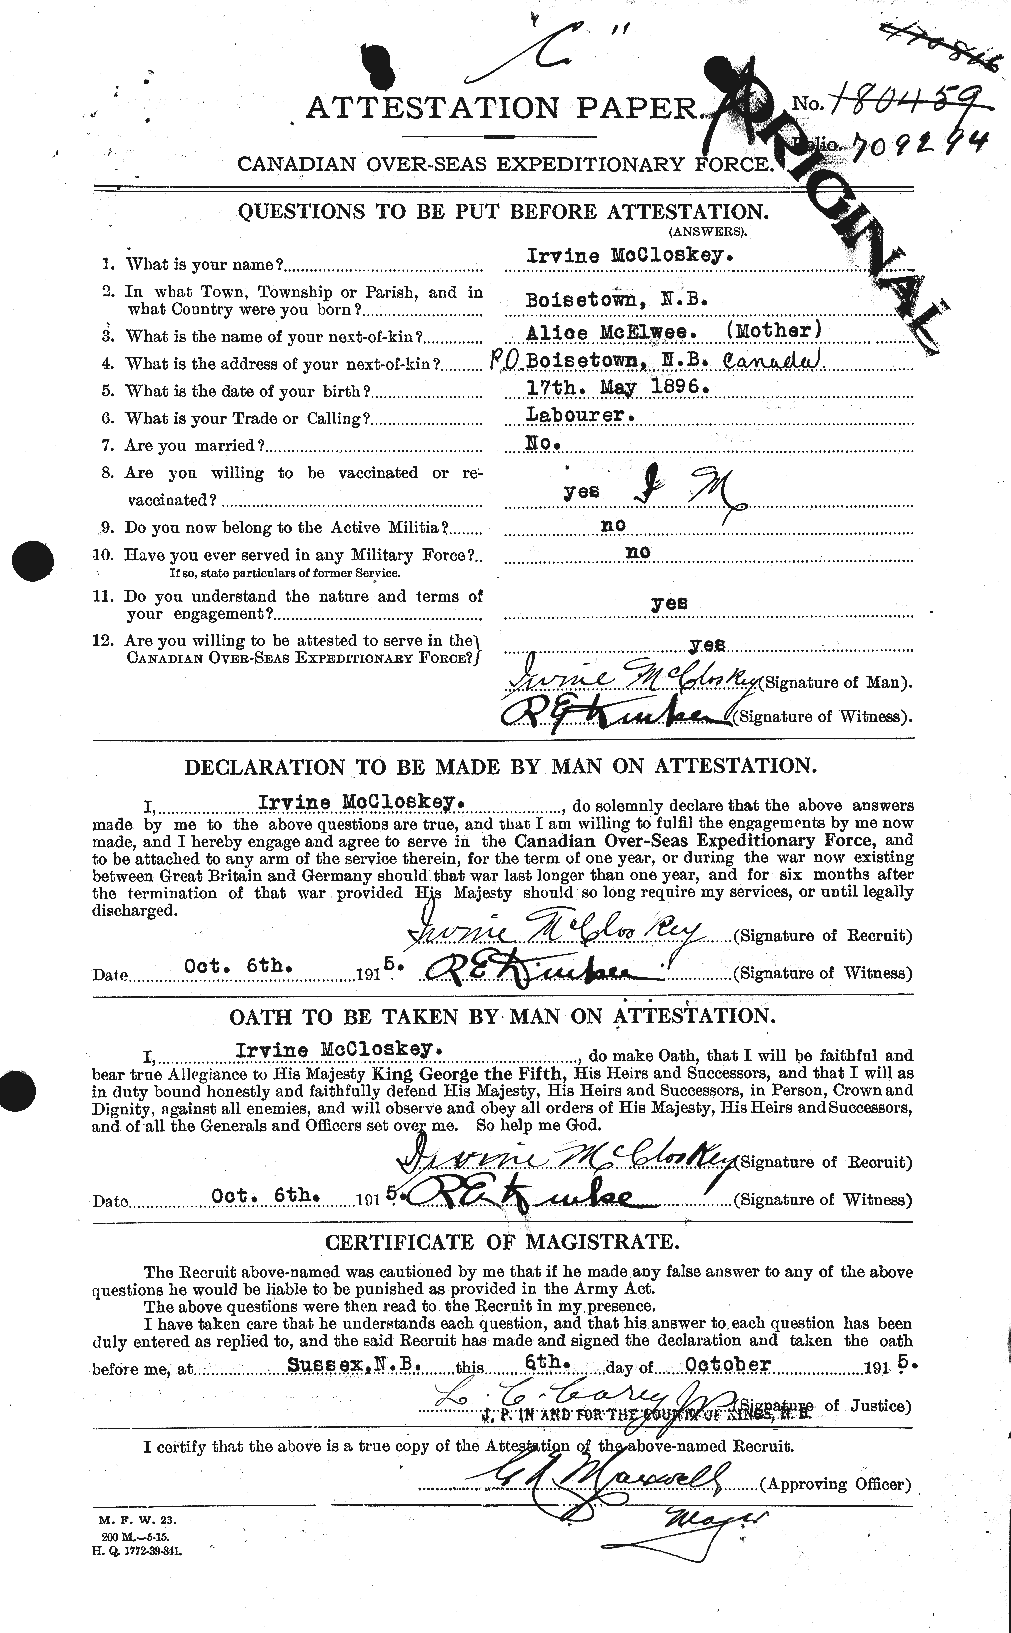 Personnel Records of the First World War - CEF 134630a